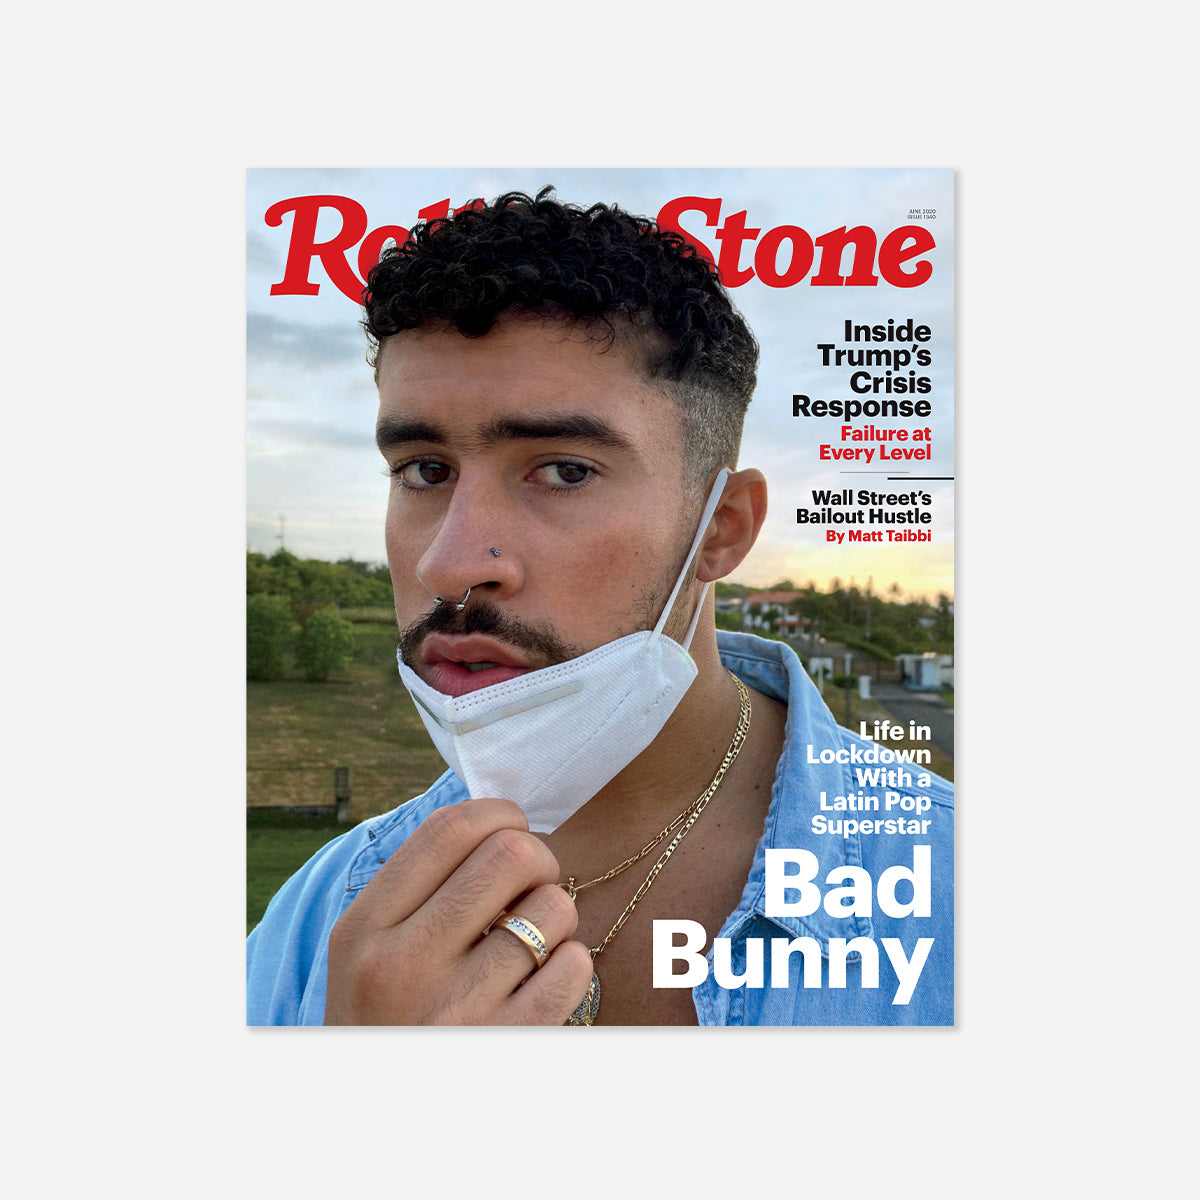 The Triumph of BTS: Rolling Stone Cover Story